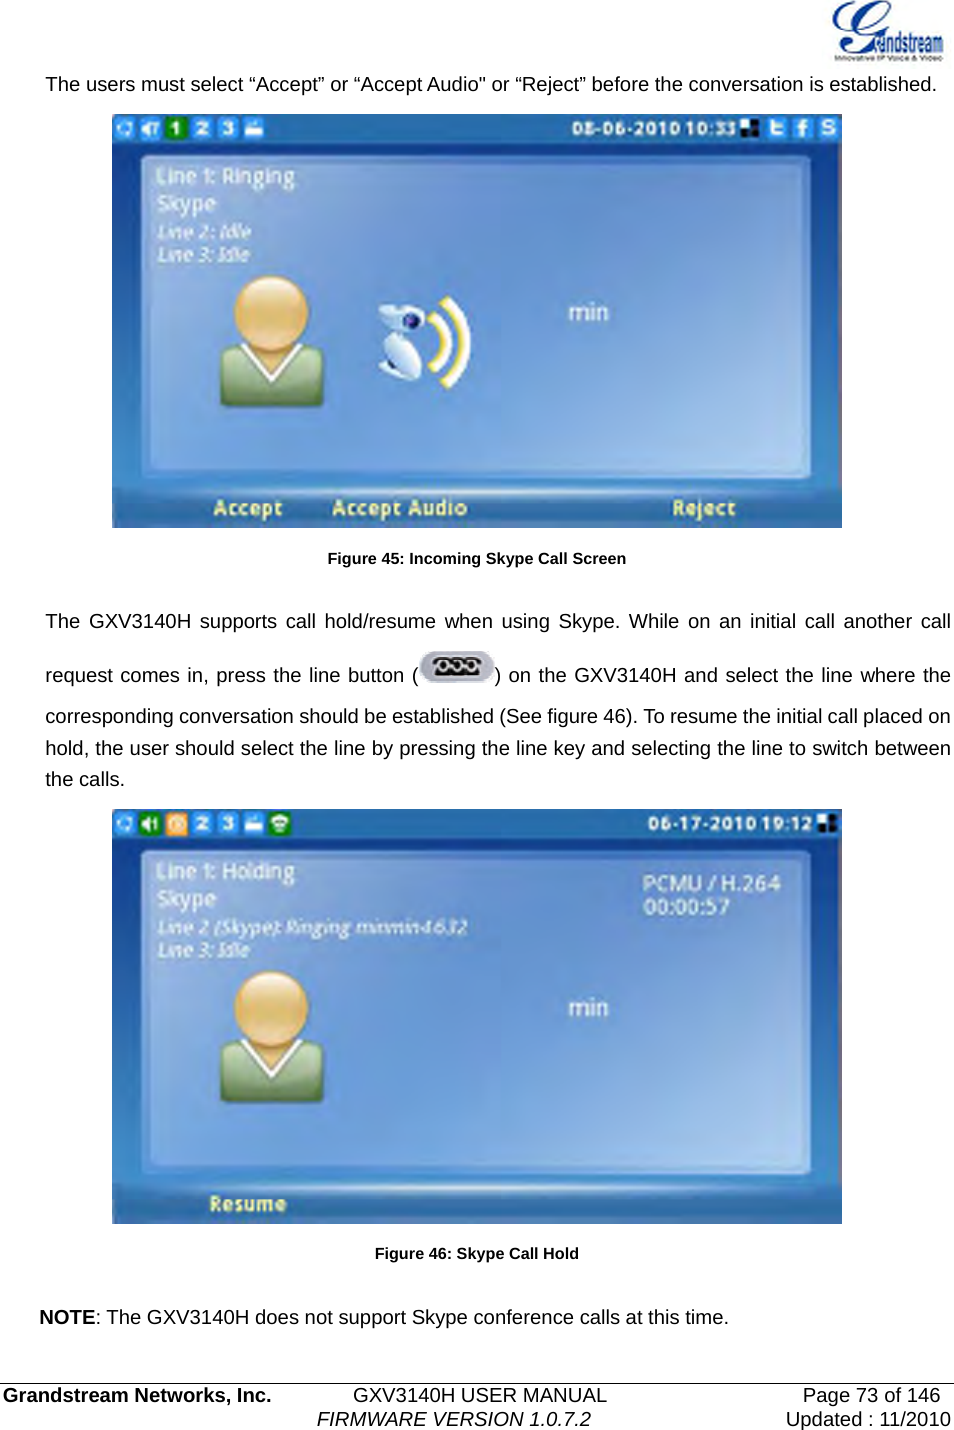   Grandstream Networks, Inc.        GXV3140H USER MANUAL                  Page 73 of 146                                FIRMWARE VERSION 1.0.7.2 Updated : 11/2010  The users must select “Accept” or “Accept Audio&quot; or “Reject” before the conversation is established.  Figure 45: Incoming Skype Call Screen  The GXV3140H supports call hold/resume when using Skype. While on an initial call another call request comes in, press the line button ( ) on the GXV3140H and select the line where the corresponding conversation should be established (See figure 46). To resume the initial call placed on hold, the user should select the line by pressing the line key and selecting the line to switch between the calls.    Figure 46: Skype Call Hold  NOTE: The GXV3140H does not support Skype conference calls at this time. 